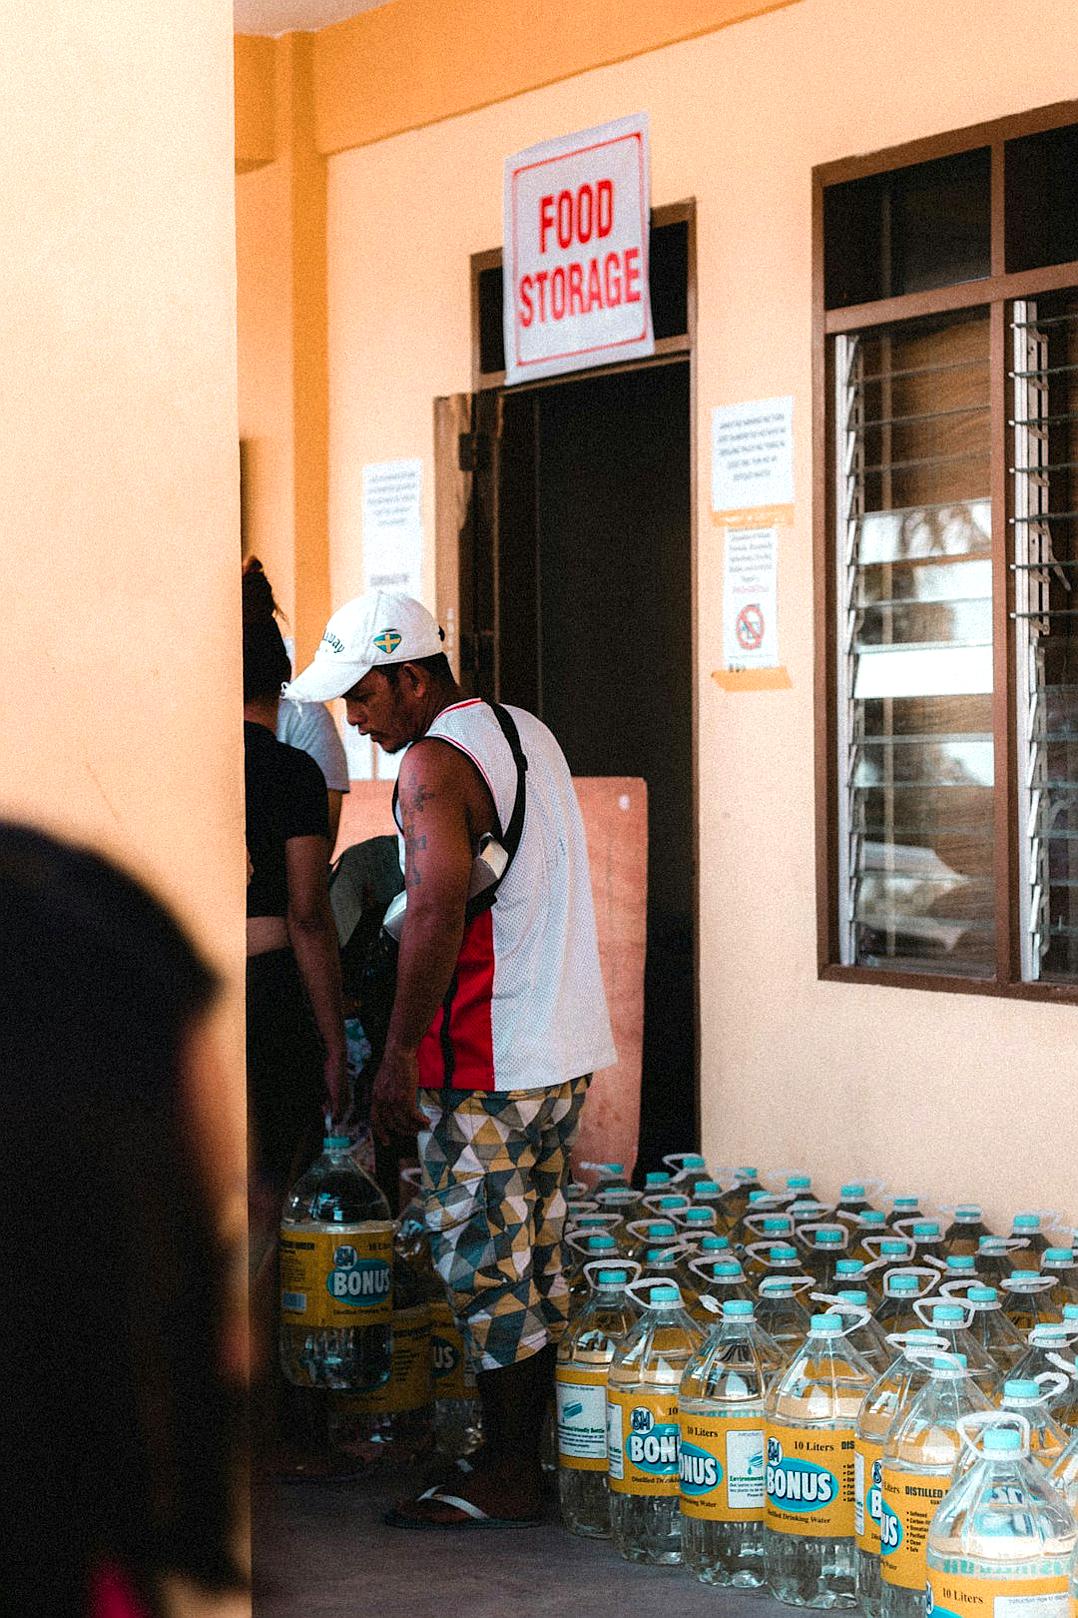 A man wearing a white cap, black and red shirt with colorful shorts standing next to his wife at the entrance of “Ekong’s food storage” store in Edo state, their hands holding several water bottles with plastic covers on them, photo taken from outside of the building, photo shot in the style of canon eos r5, 30mm lens, f/2.8, depth of field, natural light, hyper realistic